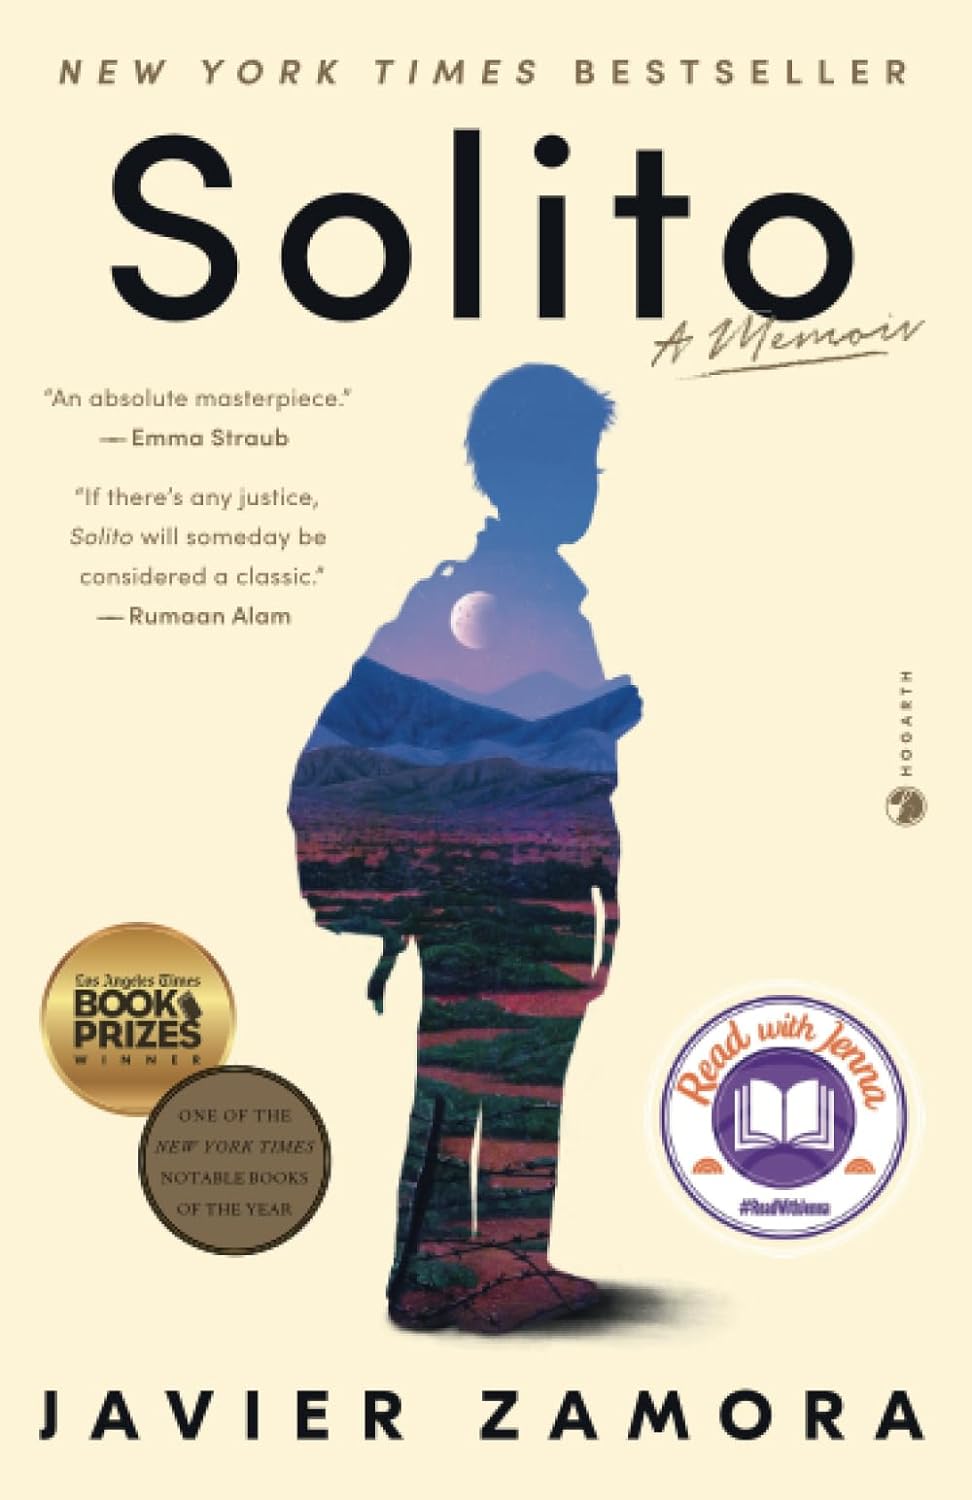 Graphic image of the book cover for Solito